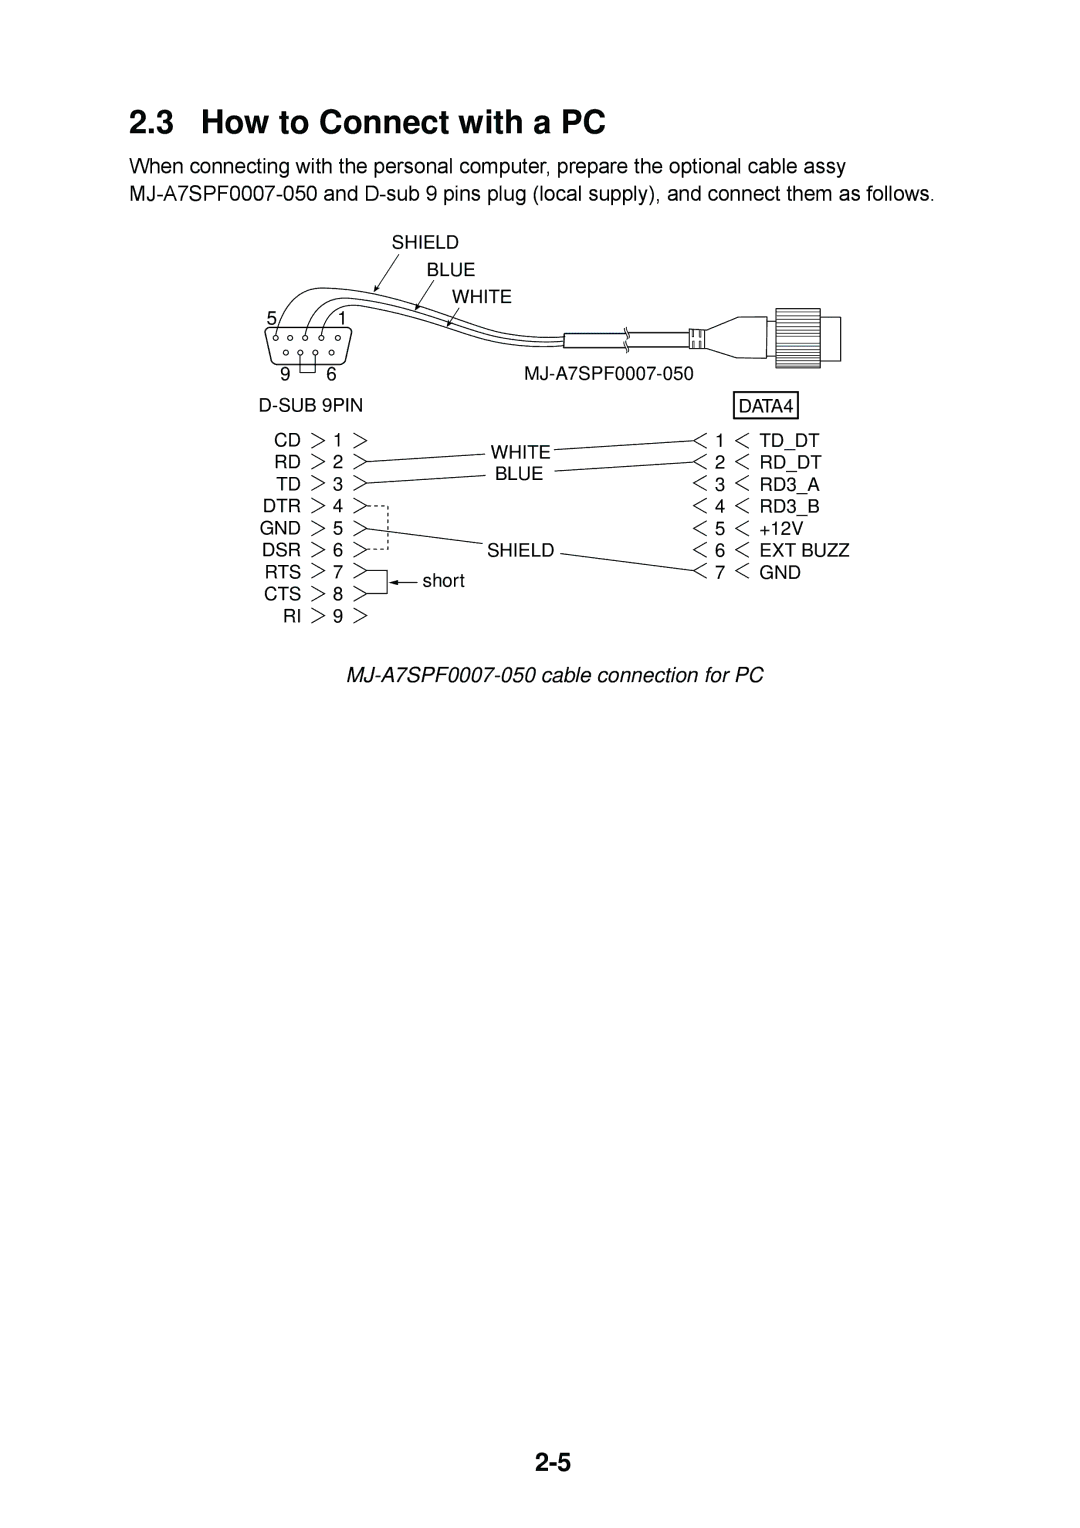 Furuno 1824C, 1954C, 1964C, 1944C, 1934C, 1834C How to Connect with a PC, MJ-A7SPF0007-050 cable connection for PC 